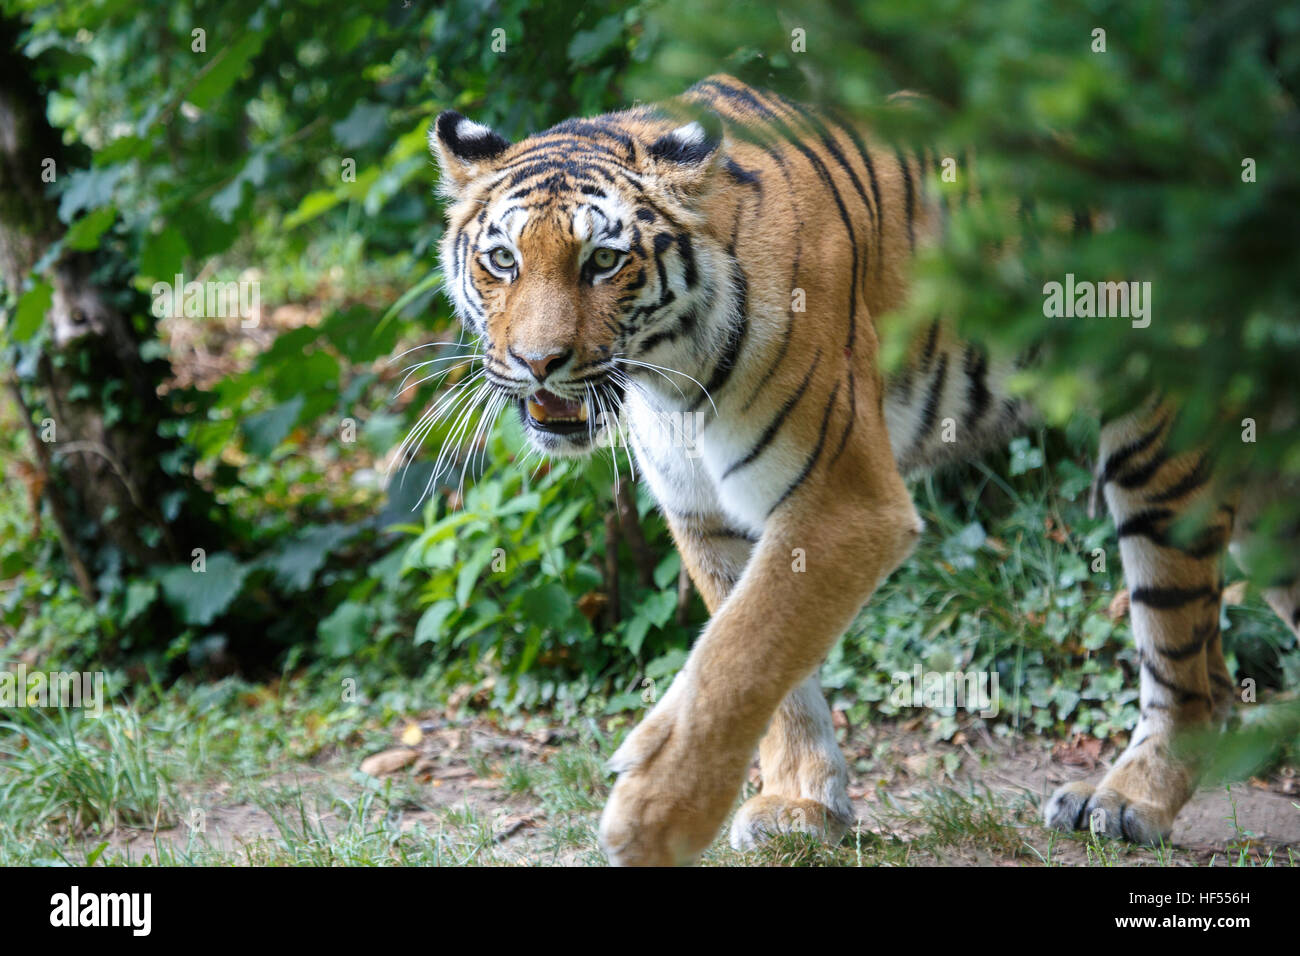 View of a siberian tiger or Amur tiger, Panthera tigris altaica, moving in the forest. Stock Photo